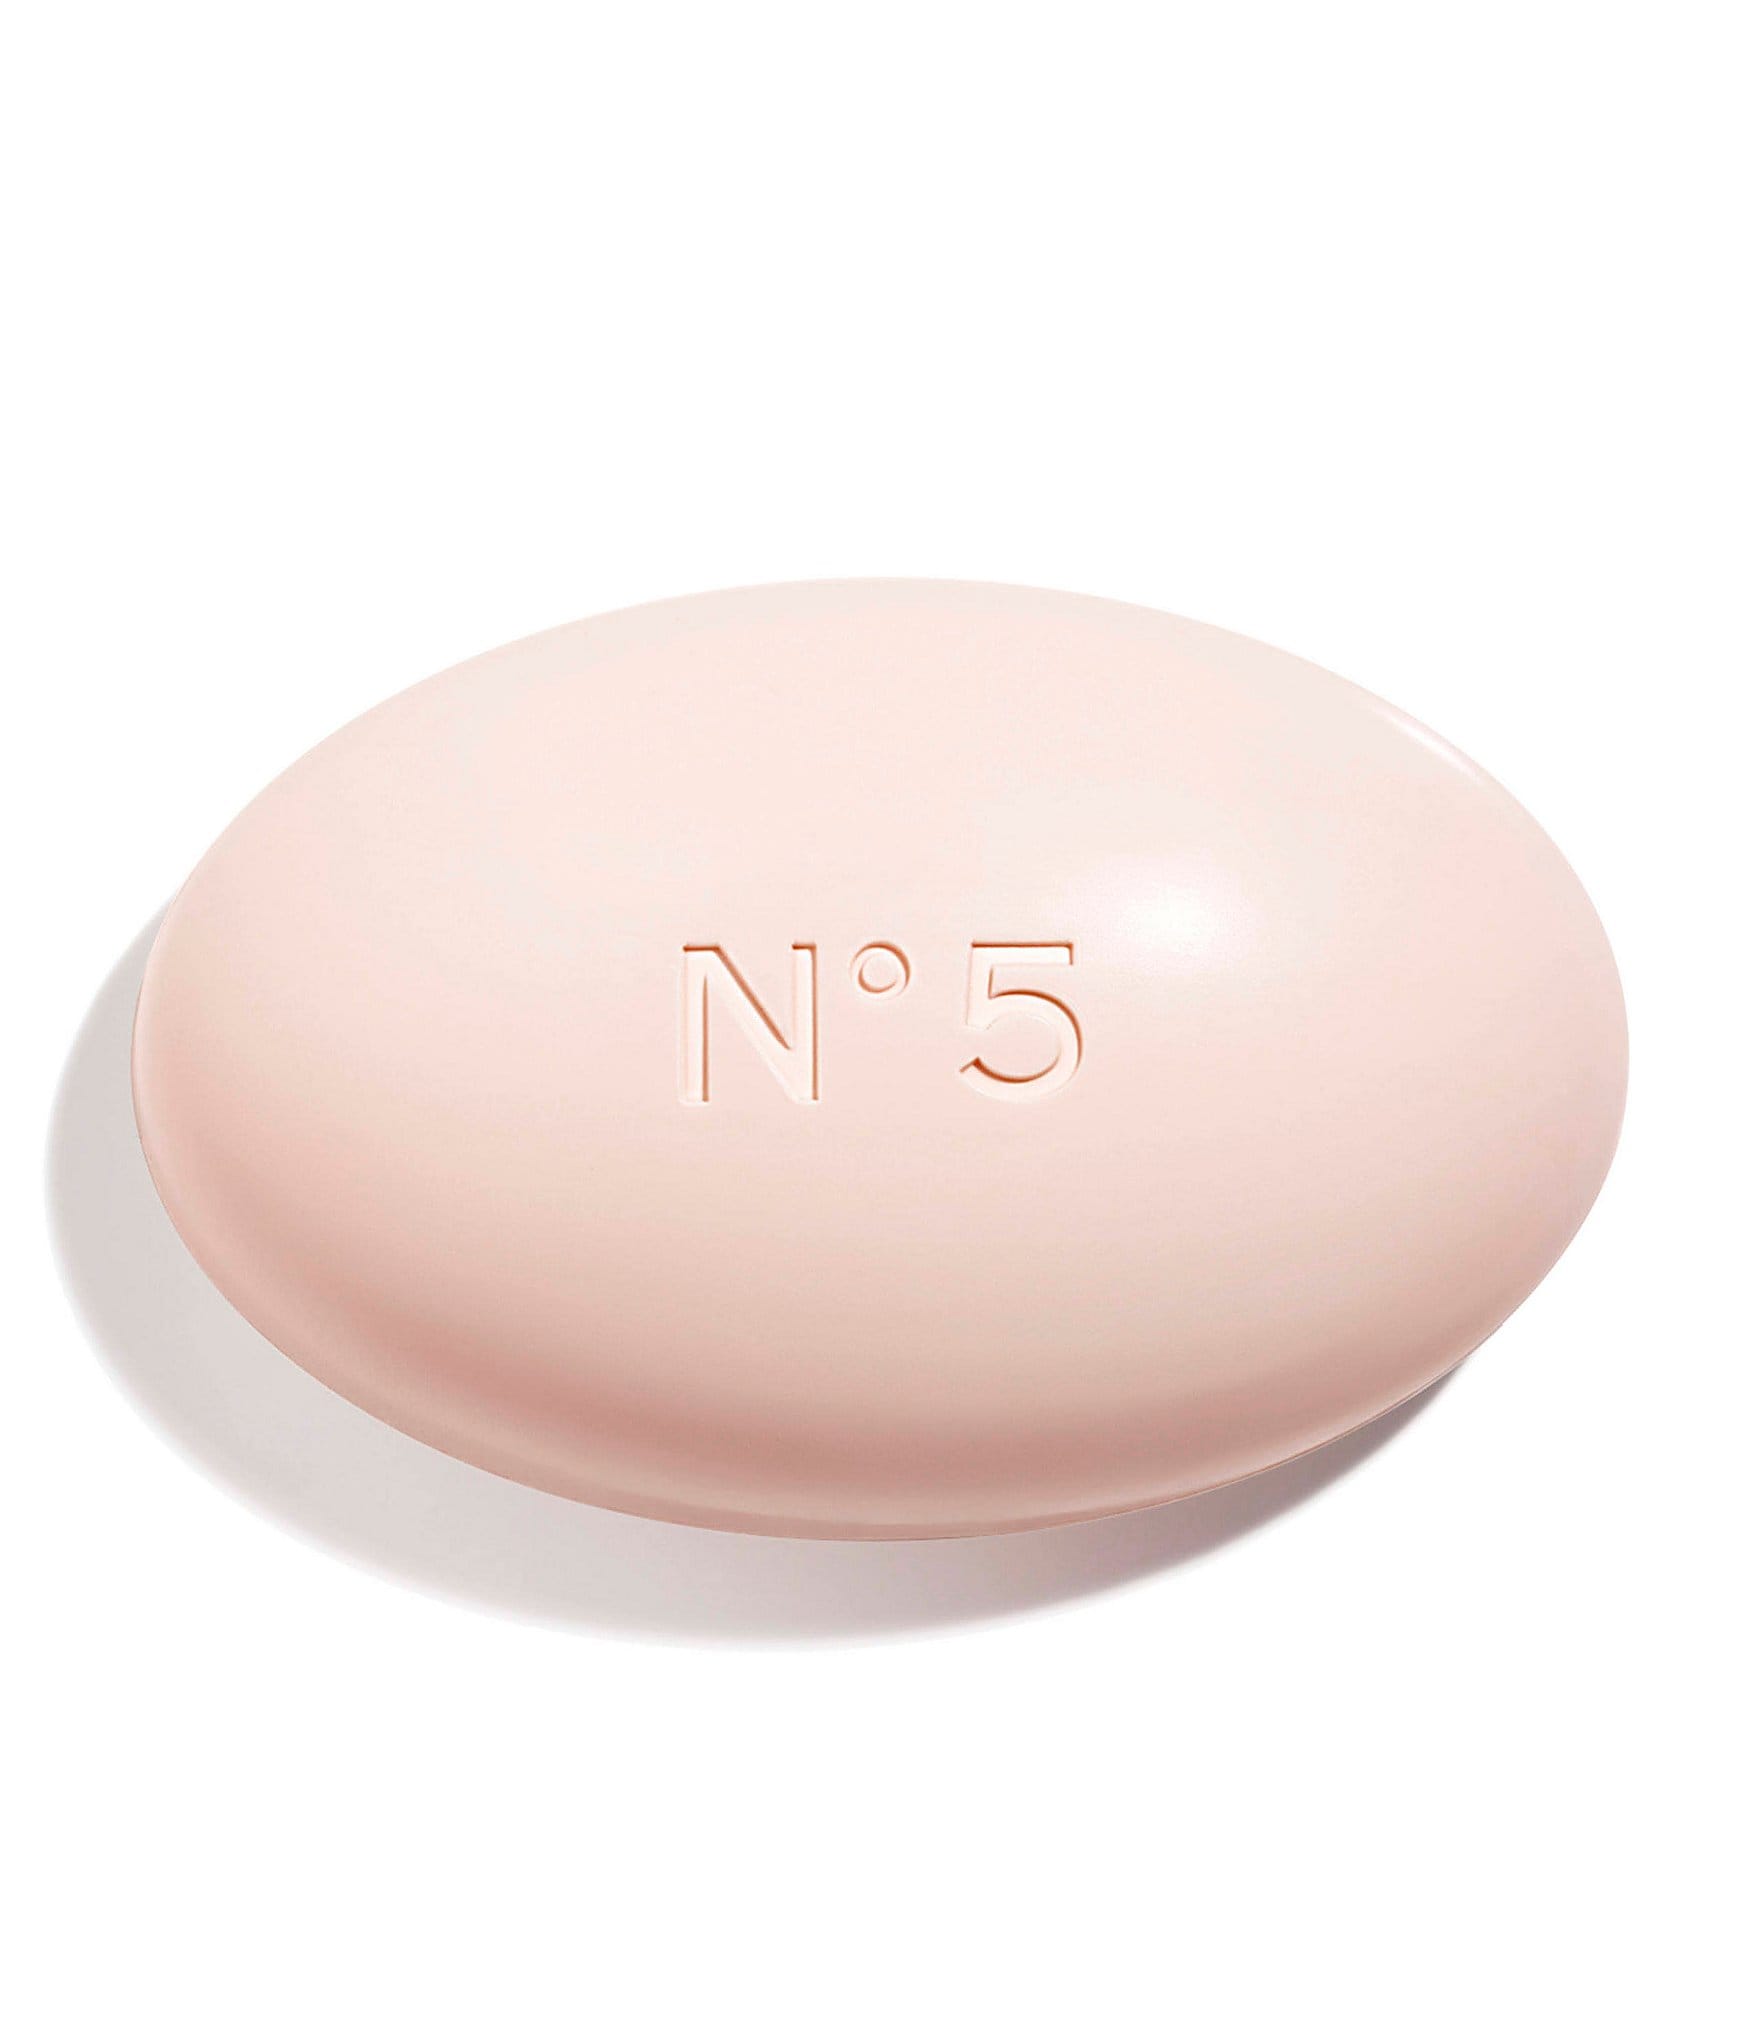 CHANEL No 5 Soap and Dish 106g New